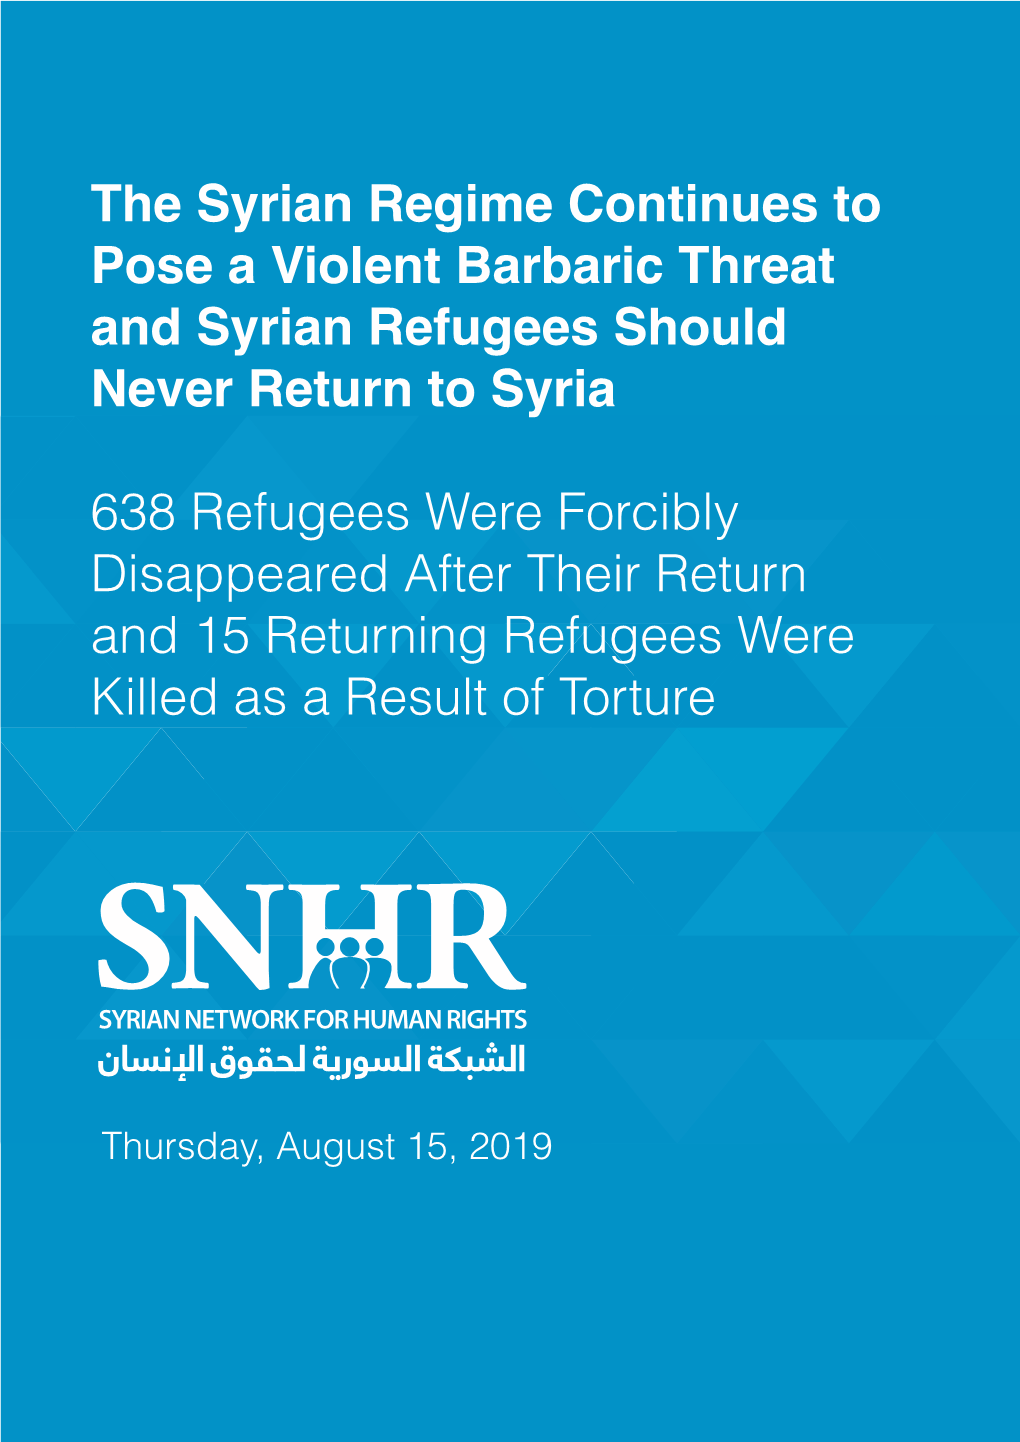 The Syrian Regime Continues to Pose a Violent Barbaric Threat and Syrian Refugees Should Never Return to Syria